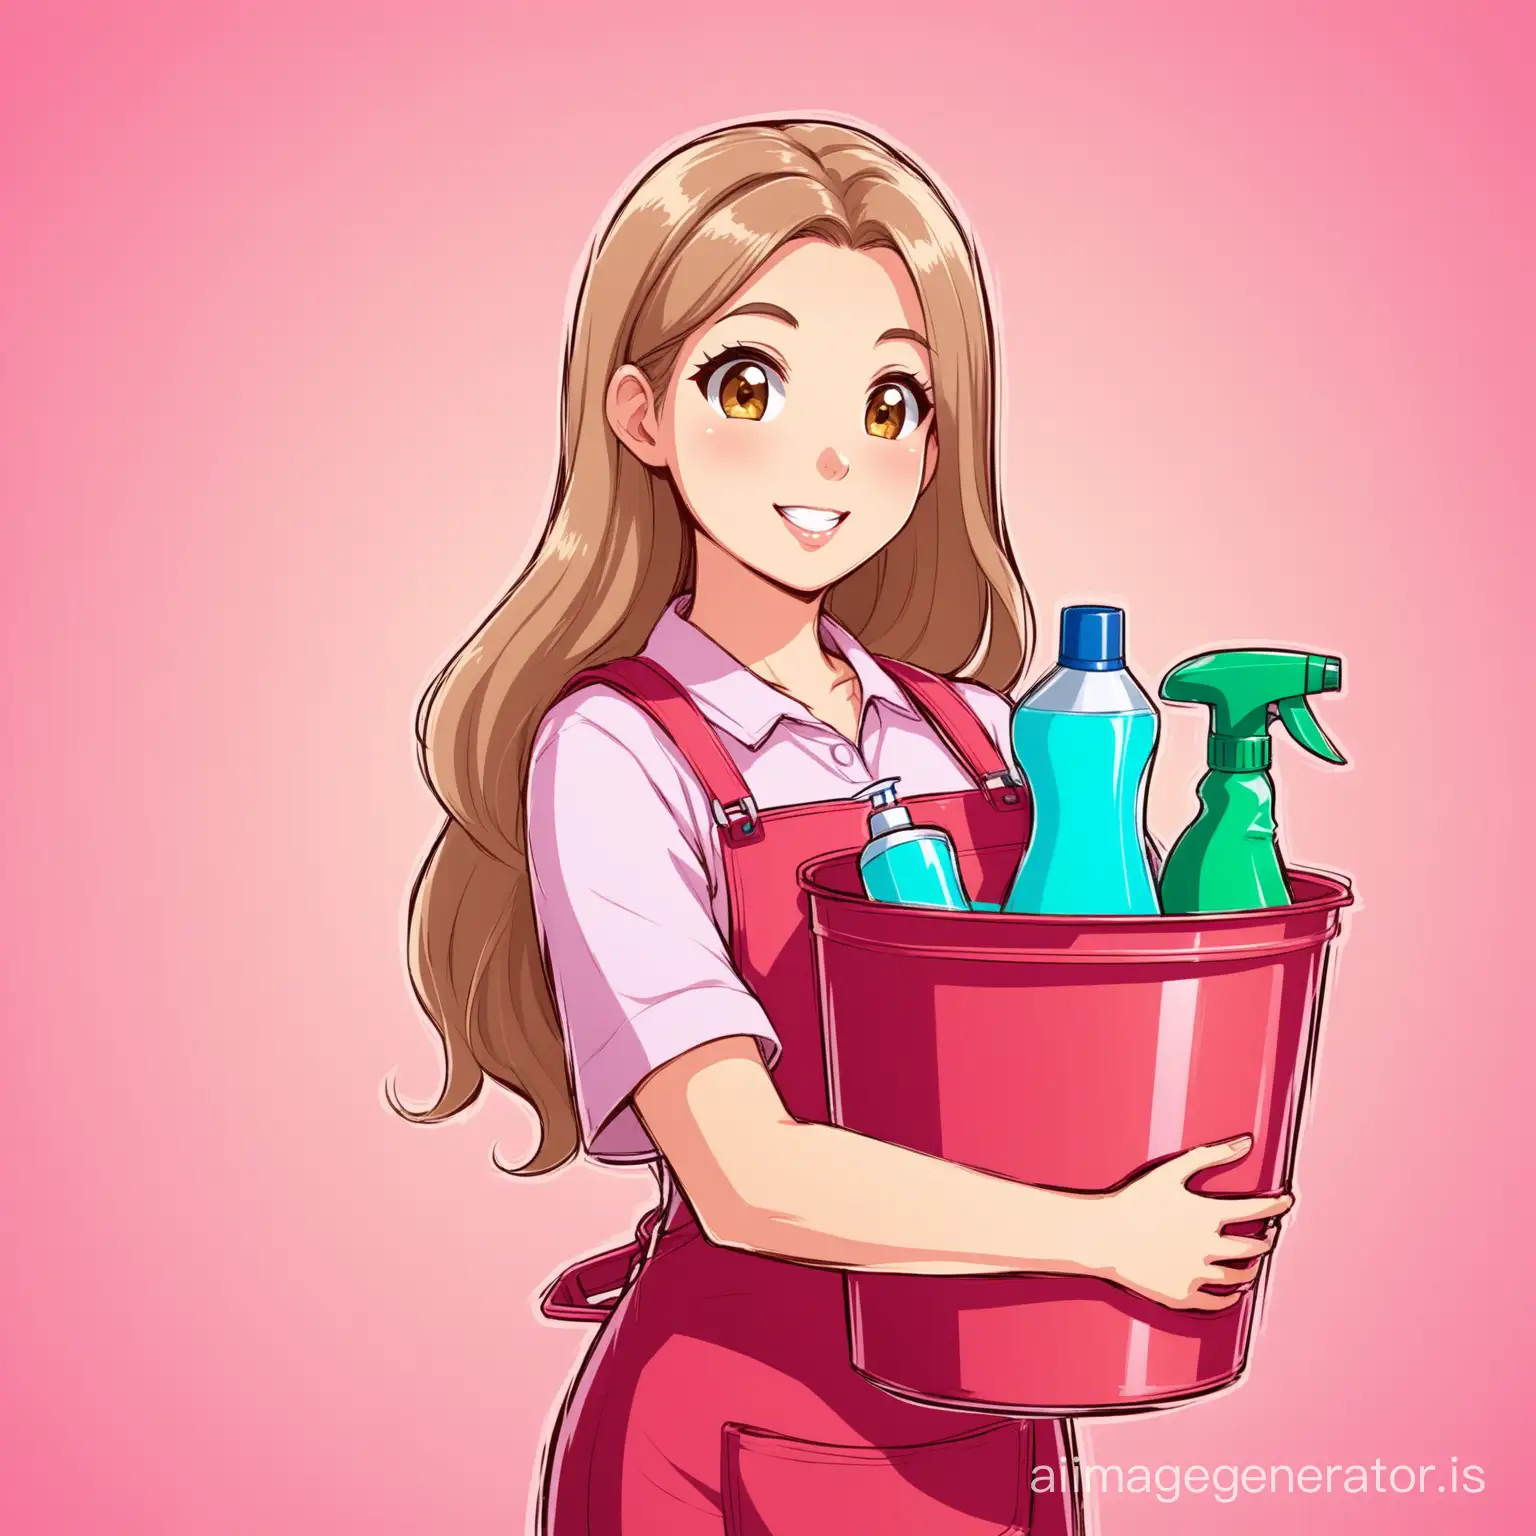 Cartoon-Woman-Cleaner-with-Bucket-of-Cleaning-Products-on-Pink-Background